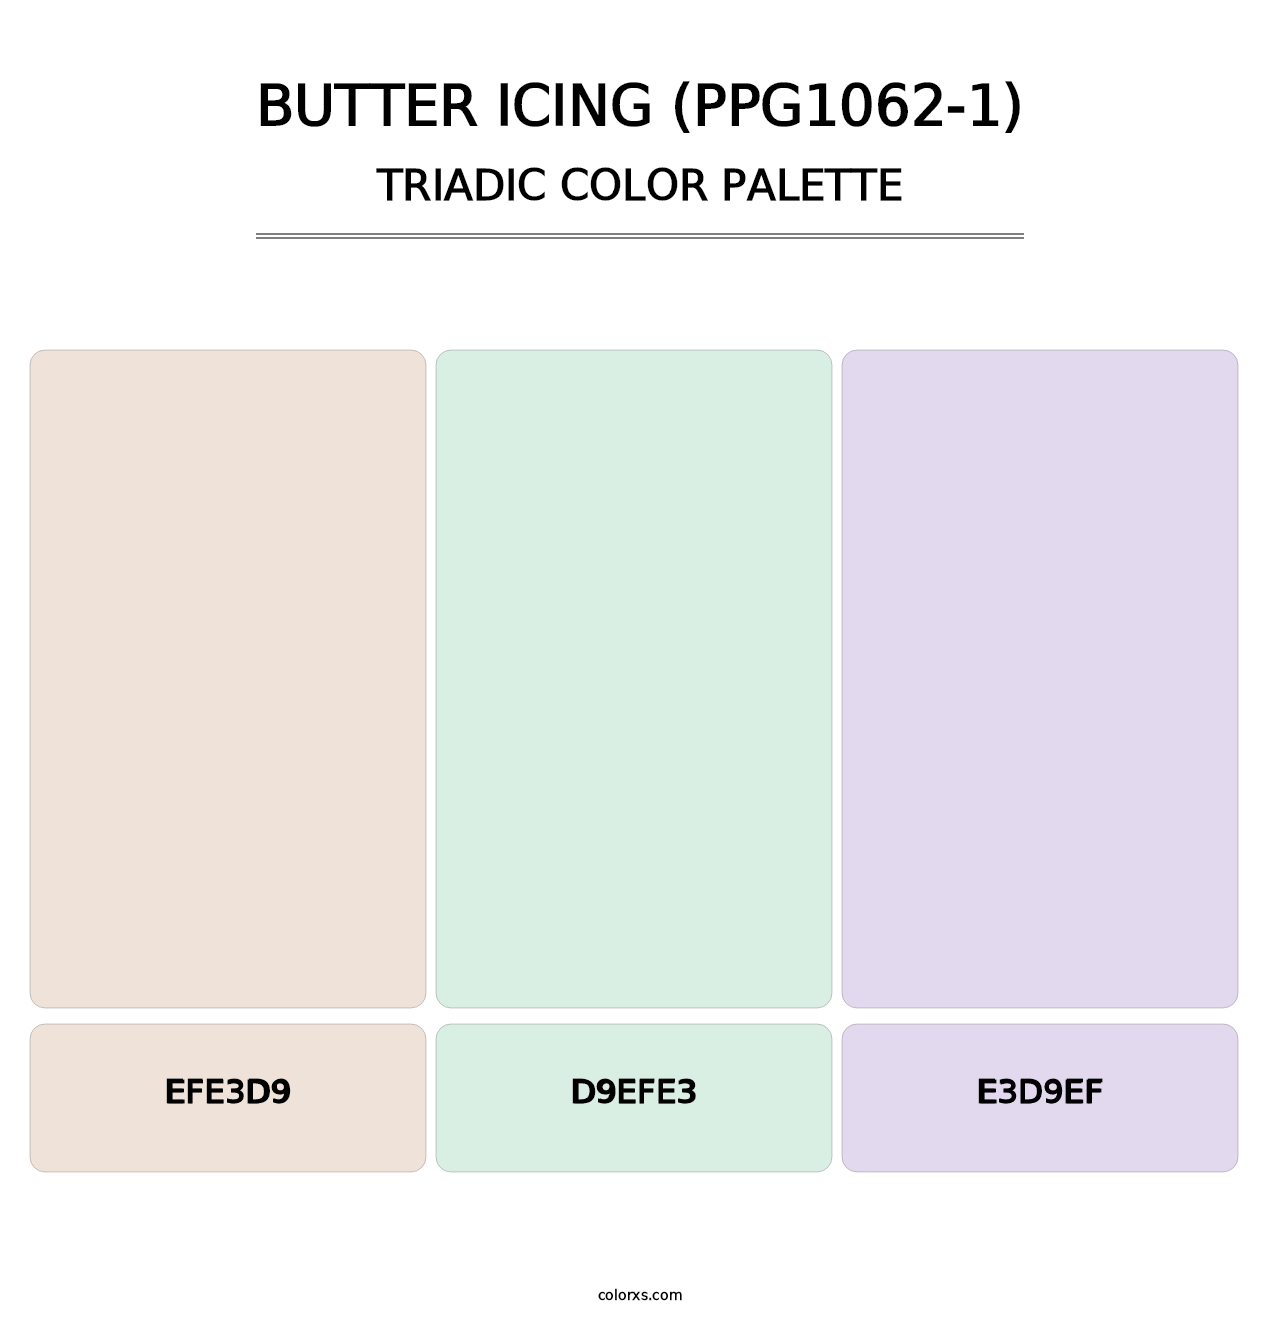 Butter Icing (PPG1062-1) - Triadic Color Palette